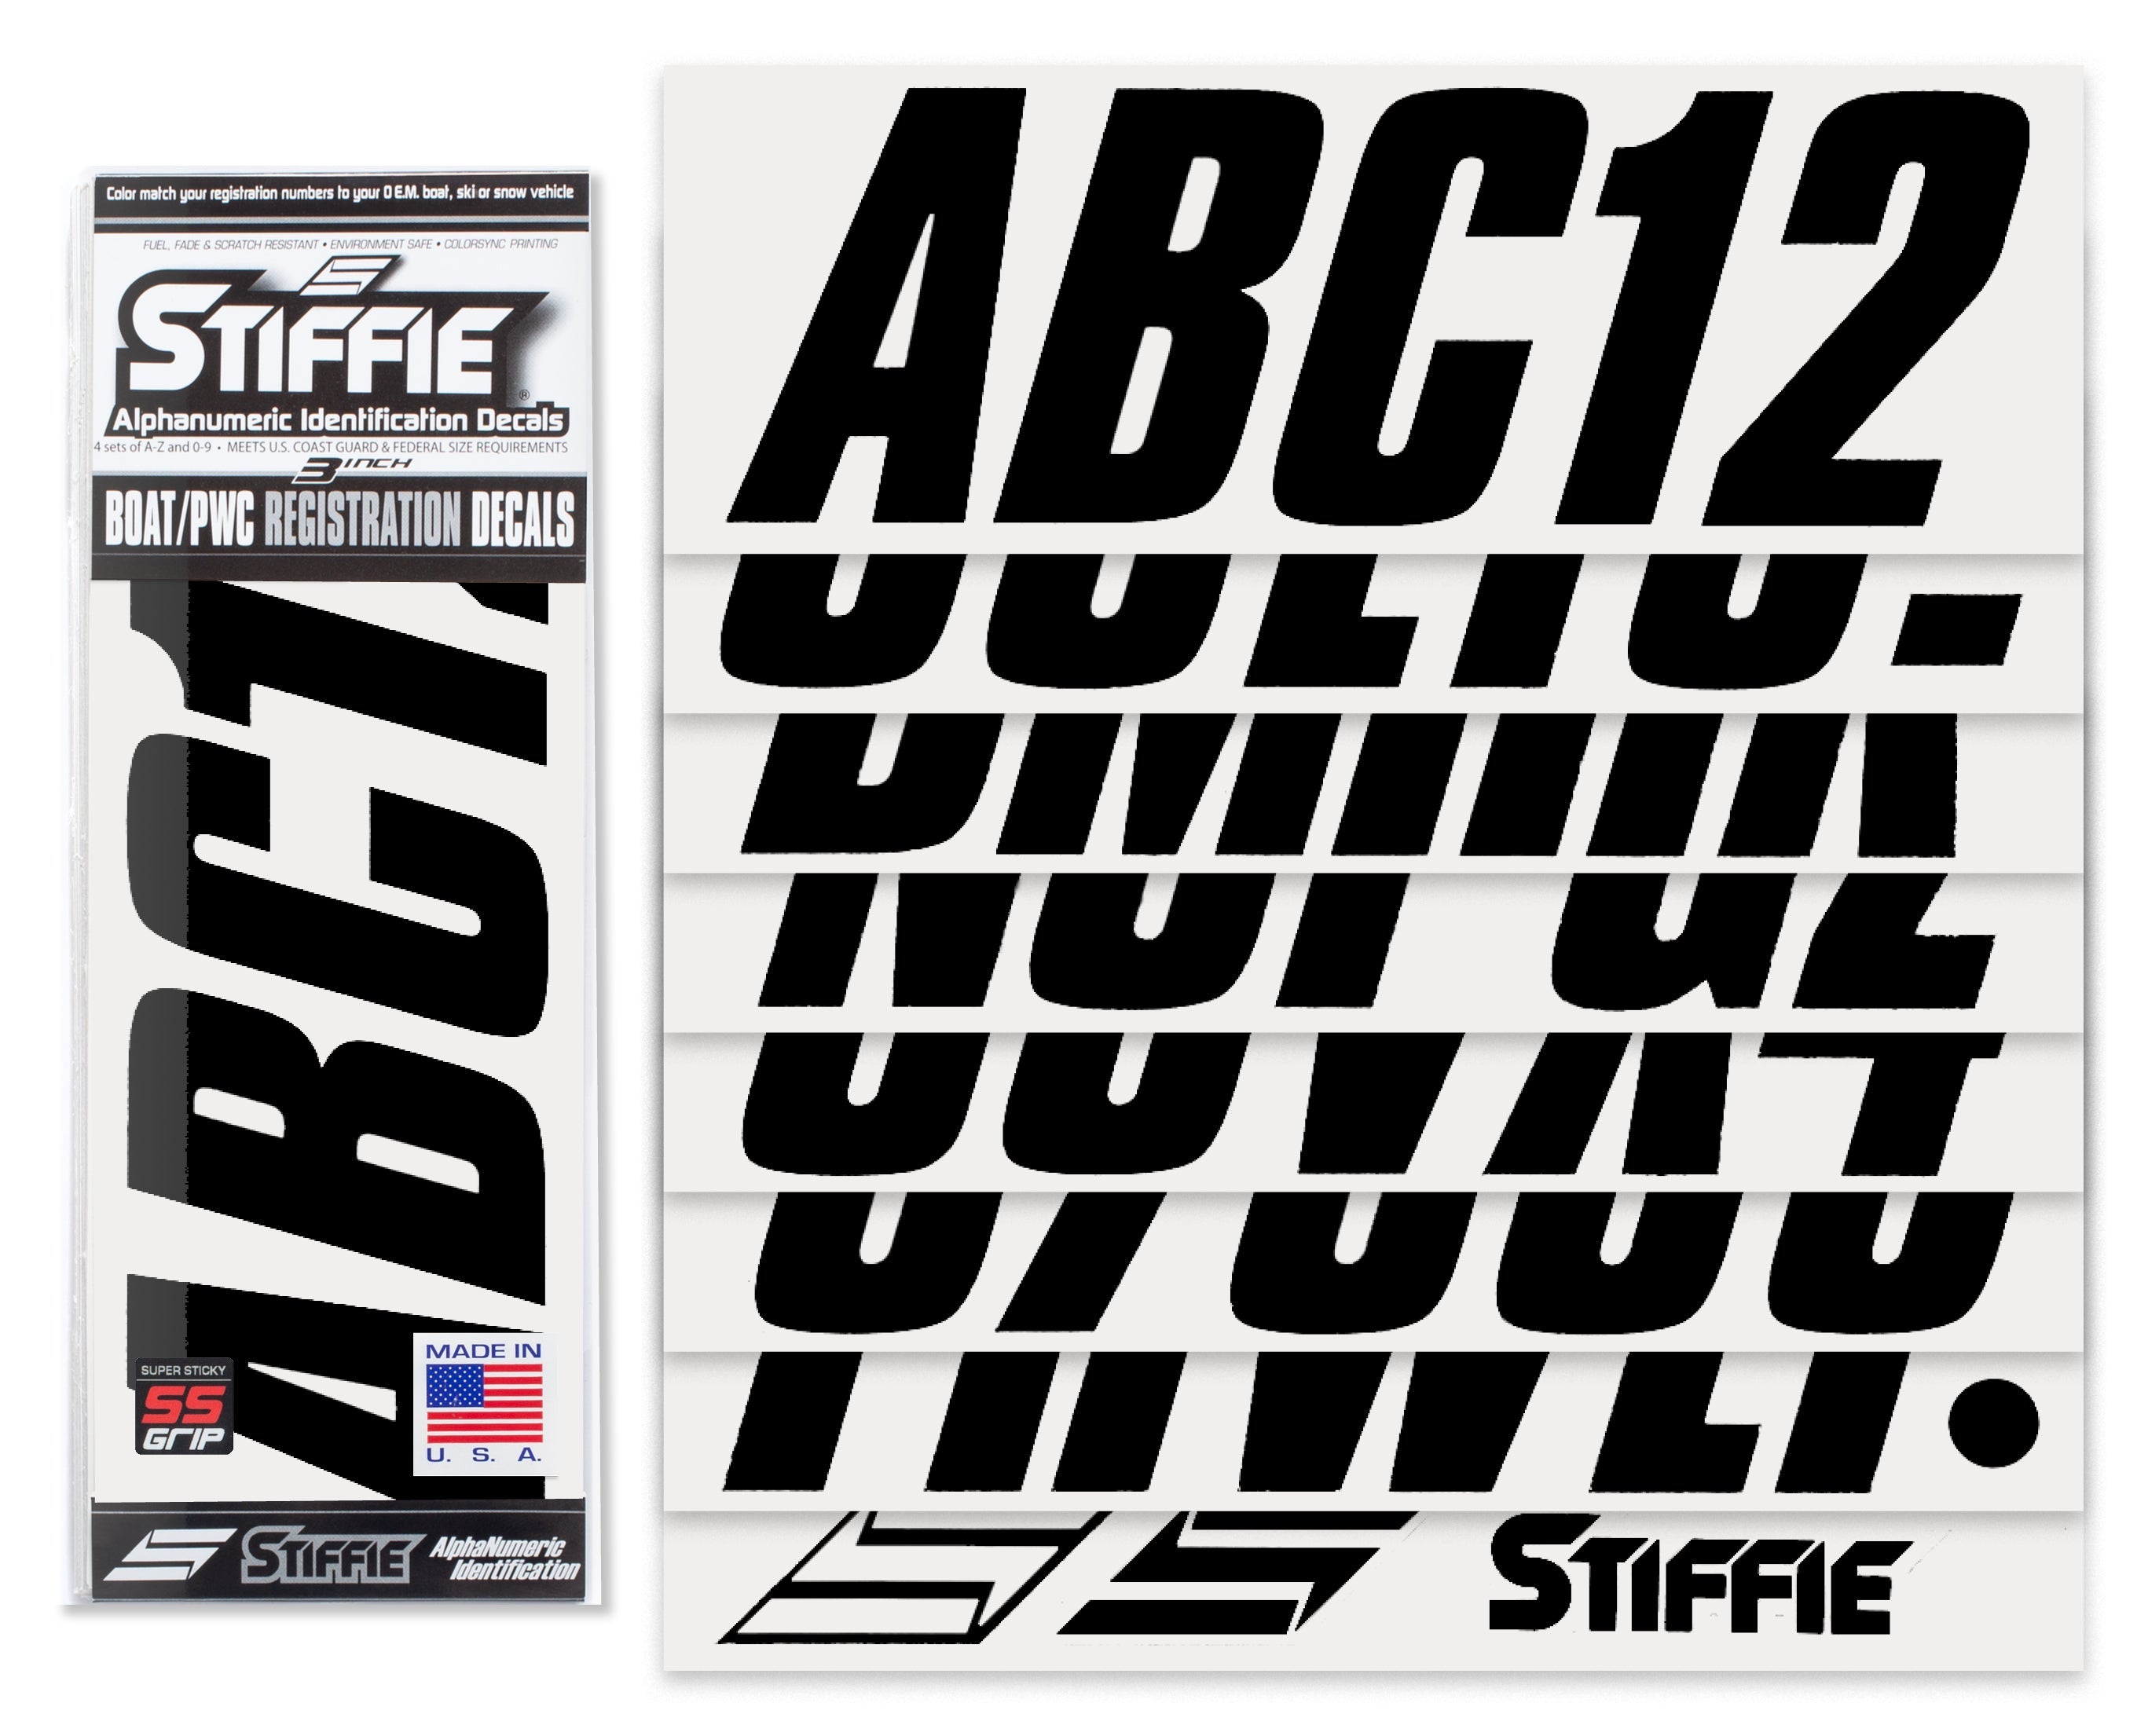 Stiffie Whip-One Black Super Sticky 3" Alpha Numeric Registration Identification Numbers Stickers Decals for Sea-Doo Spark, Inflatable Boats, Ribs, Hypalon/PVC, PWC and Boats